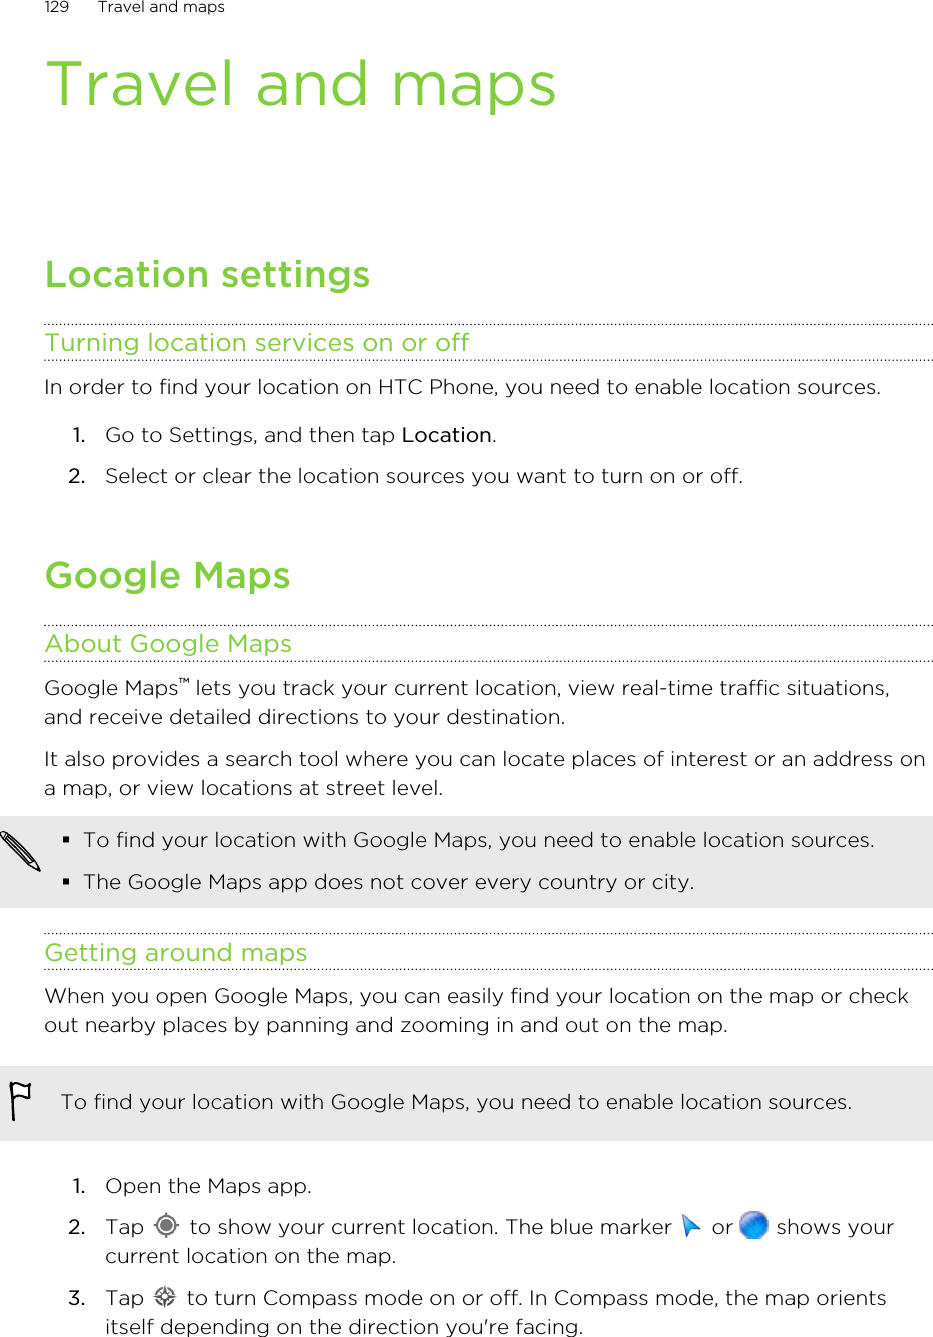 Travel and mapsLocation settingsTurning location services on or offIn order to find your location on HTC Phone, you need to enable location sources.1. Go to Settings, and then tap Location.2. Select or clear the location sources you want to turn on or off.Google MapsAbout Google MapsGoogle Maps™ lets you track your current location, view real-time traffic situations,and receive detailed directions to your destination.It also provides a search tool where you can locate places of interest or an address ona map, or view locations at street level.§To find your location with Google Maps, you need to enable location sources.§The Google Maps app does not cover every country or city.Getting around mapsWhen you open Google Maps, you can easily find your location on the map or checkout nearby places by panning and zooming in and out on the map.To find your location with Google Maps, you need to enable location sources.1. Open the Maps app.2. Tap   to show your current location. The blue marker   or   shows yourcurrent location on the map.3. Tap   to turn Compass mode on or off. In Compass mode, the map orientsitself depending on the direction you&apos;re facing.129 Travel and mapsHTC Confidential for Certification HTC Confidential for Certification 